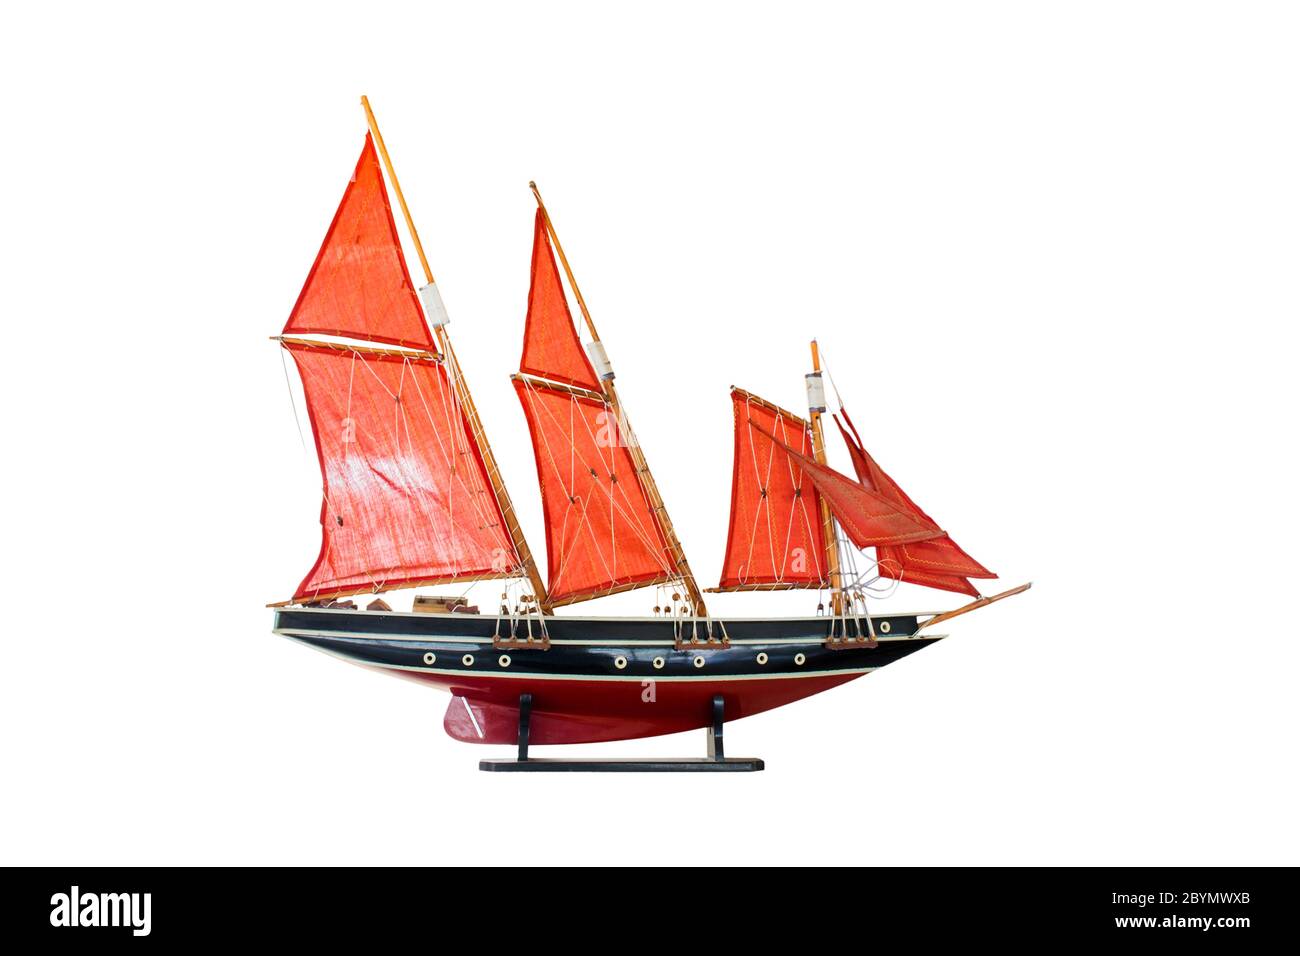 wood model barque, a type of sailing vessel, asia Stock Photo